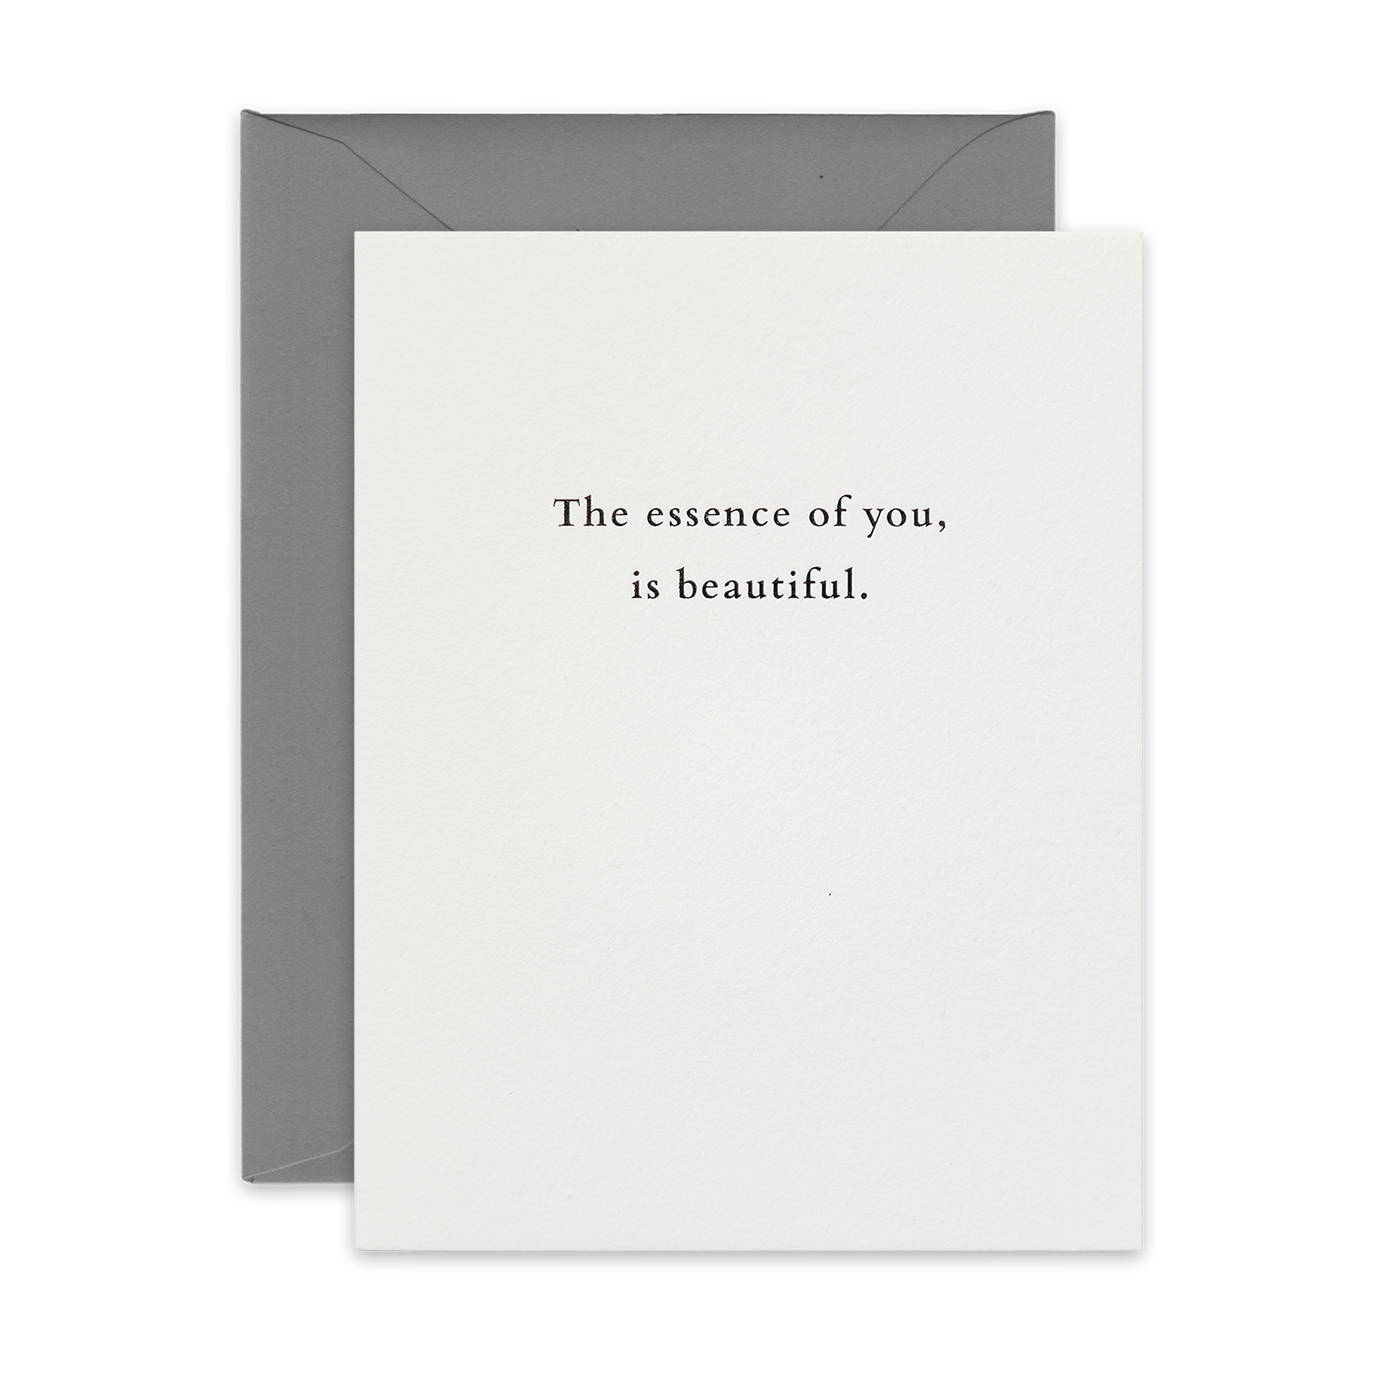 Black foil letterpress greeting card by beknown. The essence of you, is beautiful. 